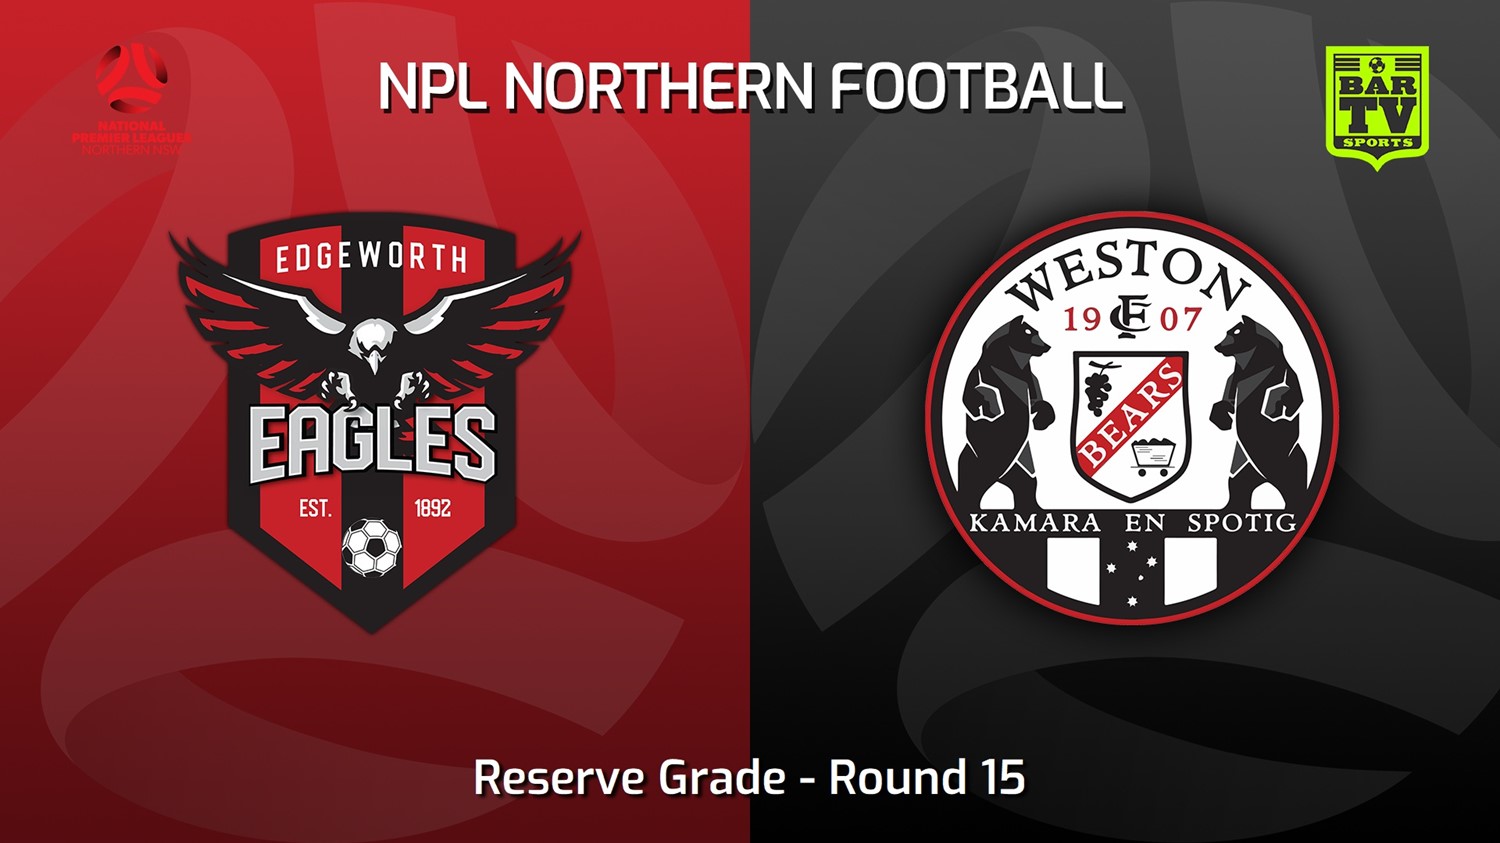 220619-NNSW NPLM Res Round 15 - Edgeworth Eagles Res v Weston Workers FC Res Slate Image